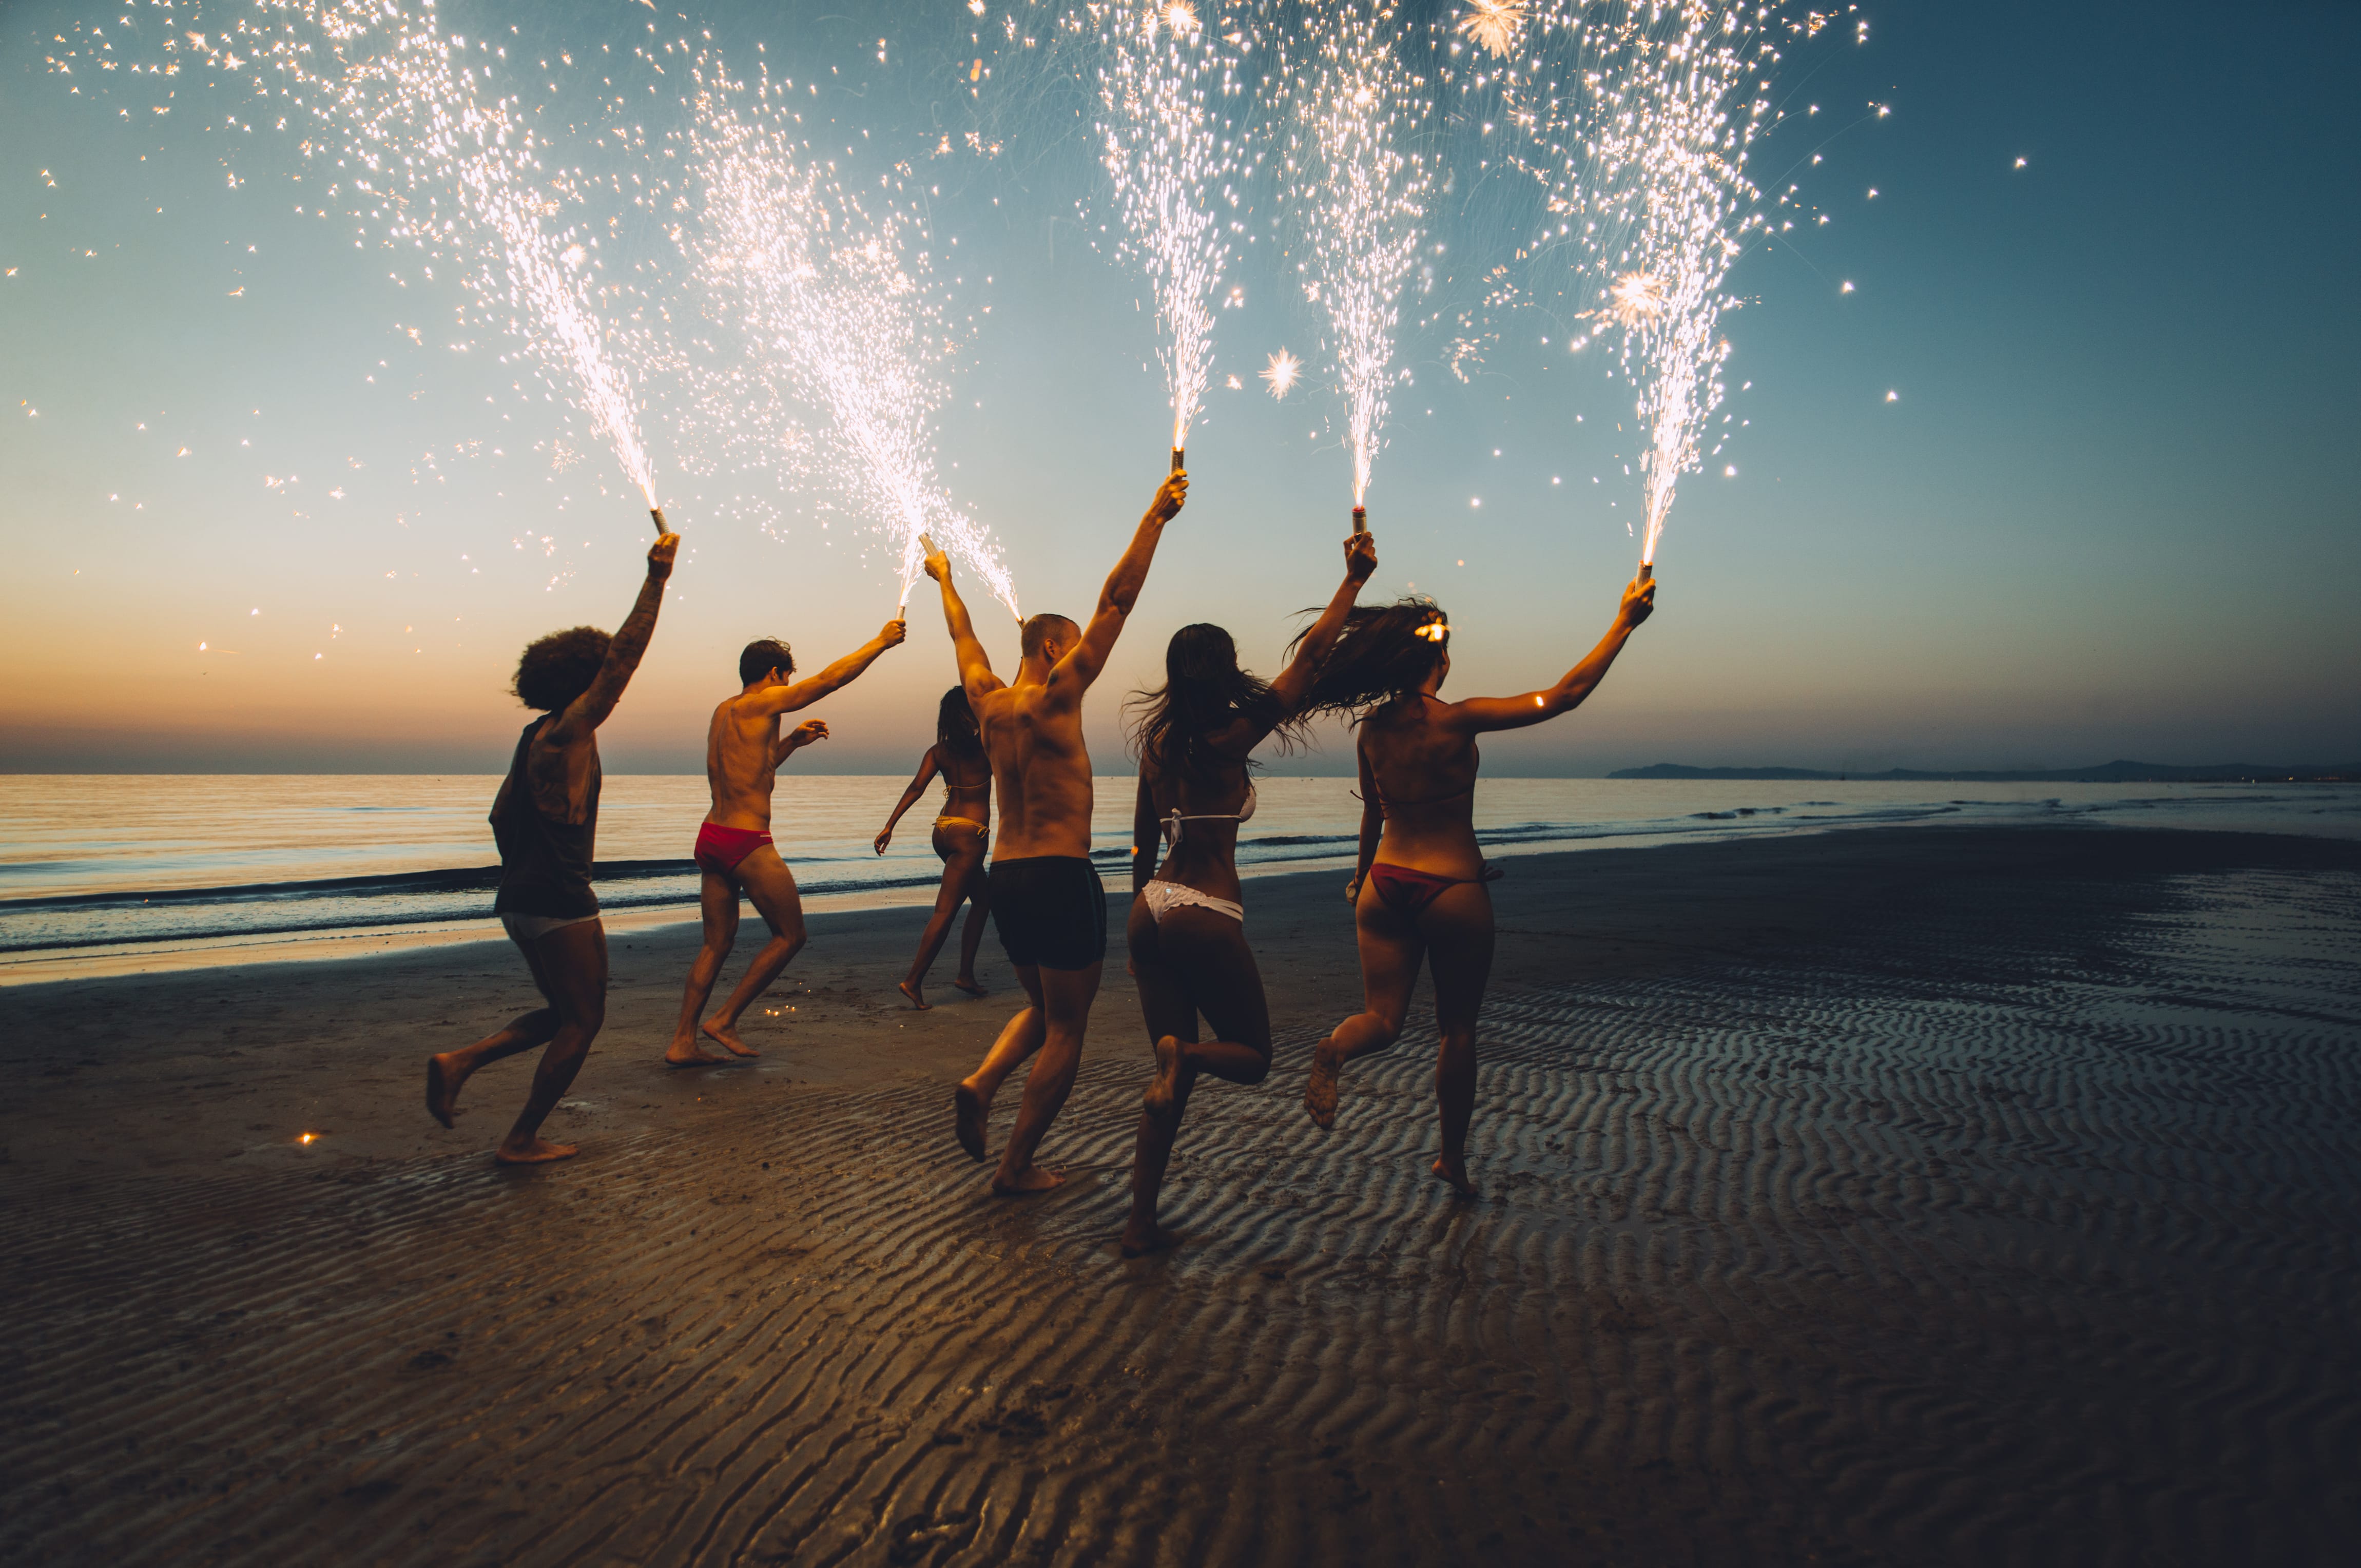 Friends at the beach with fireworks | unique friends